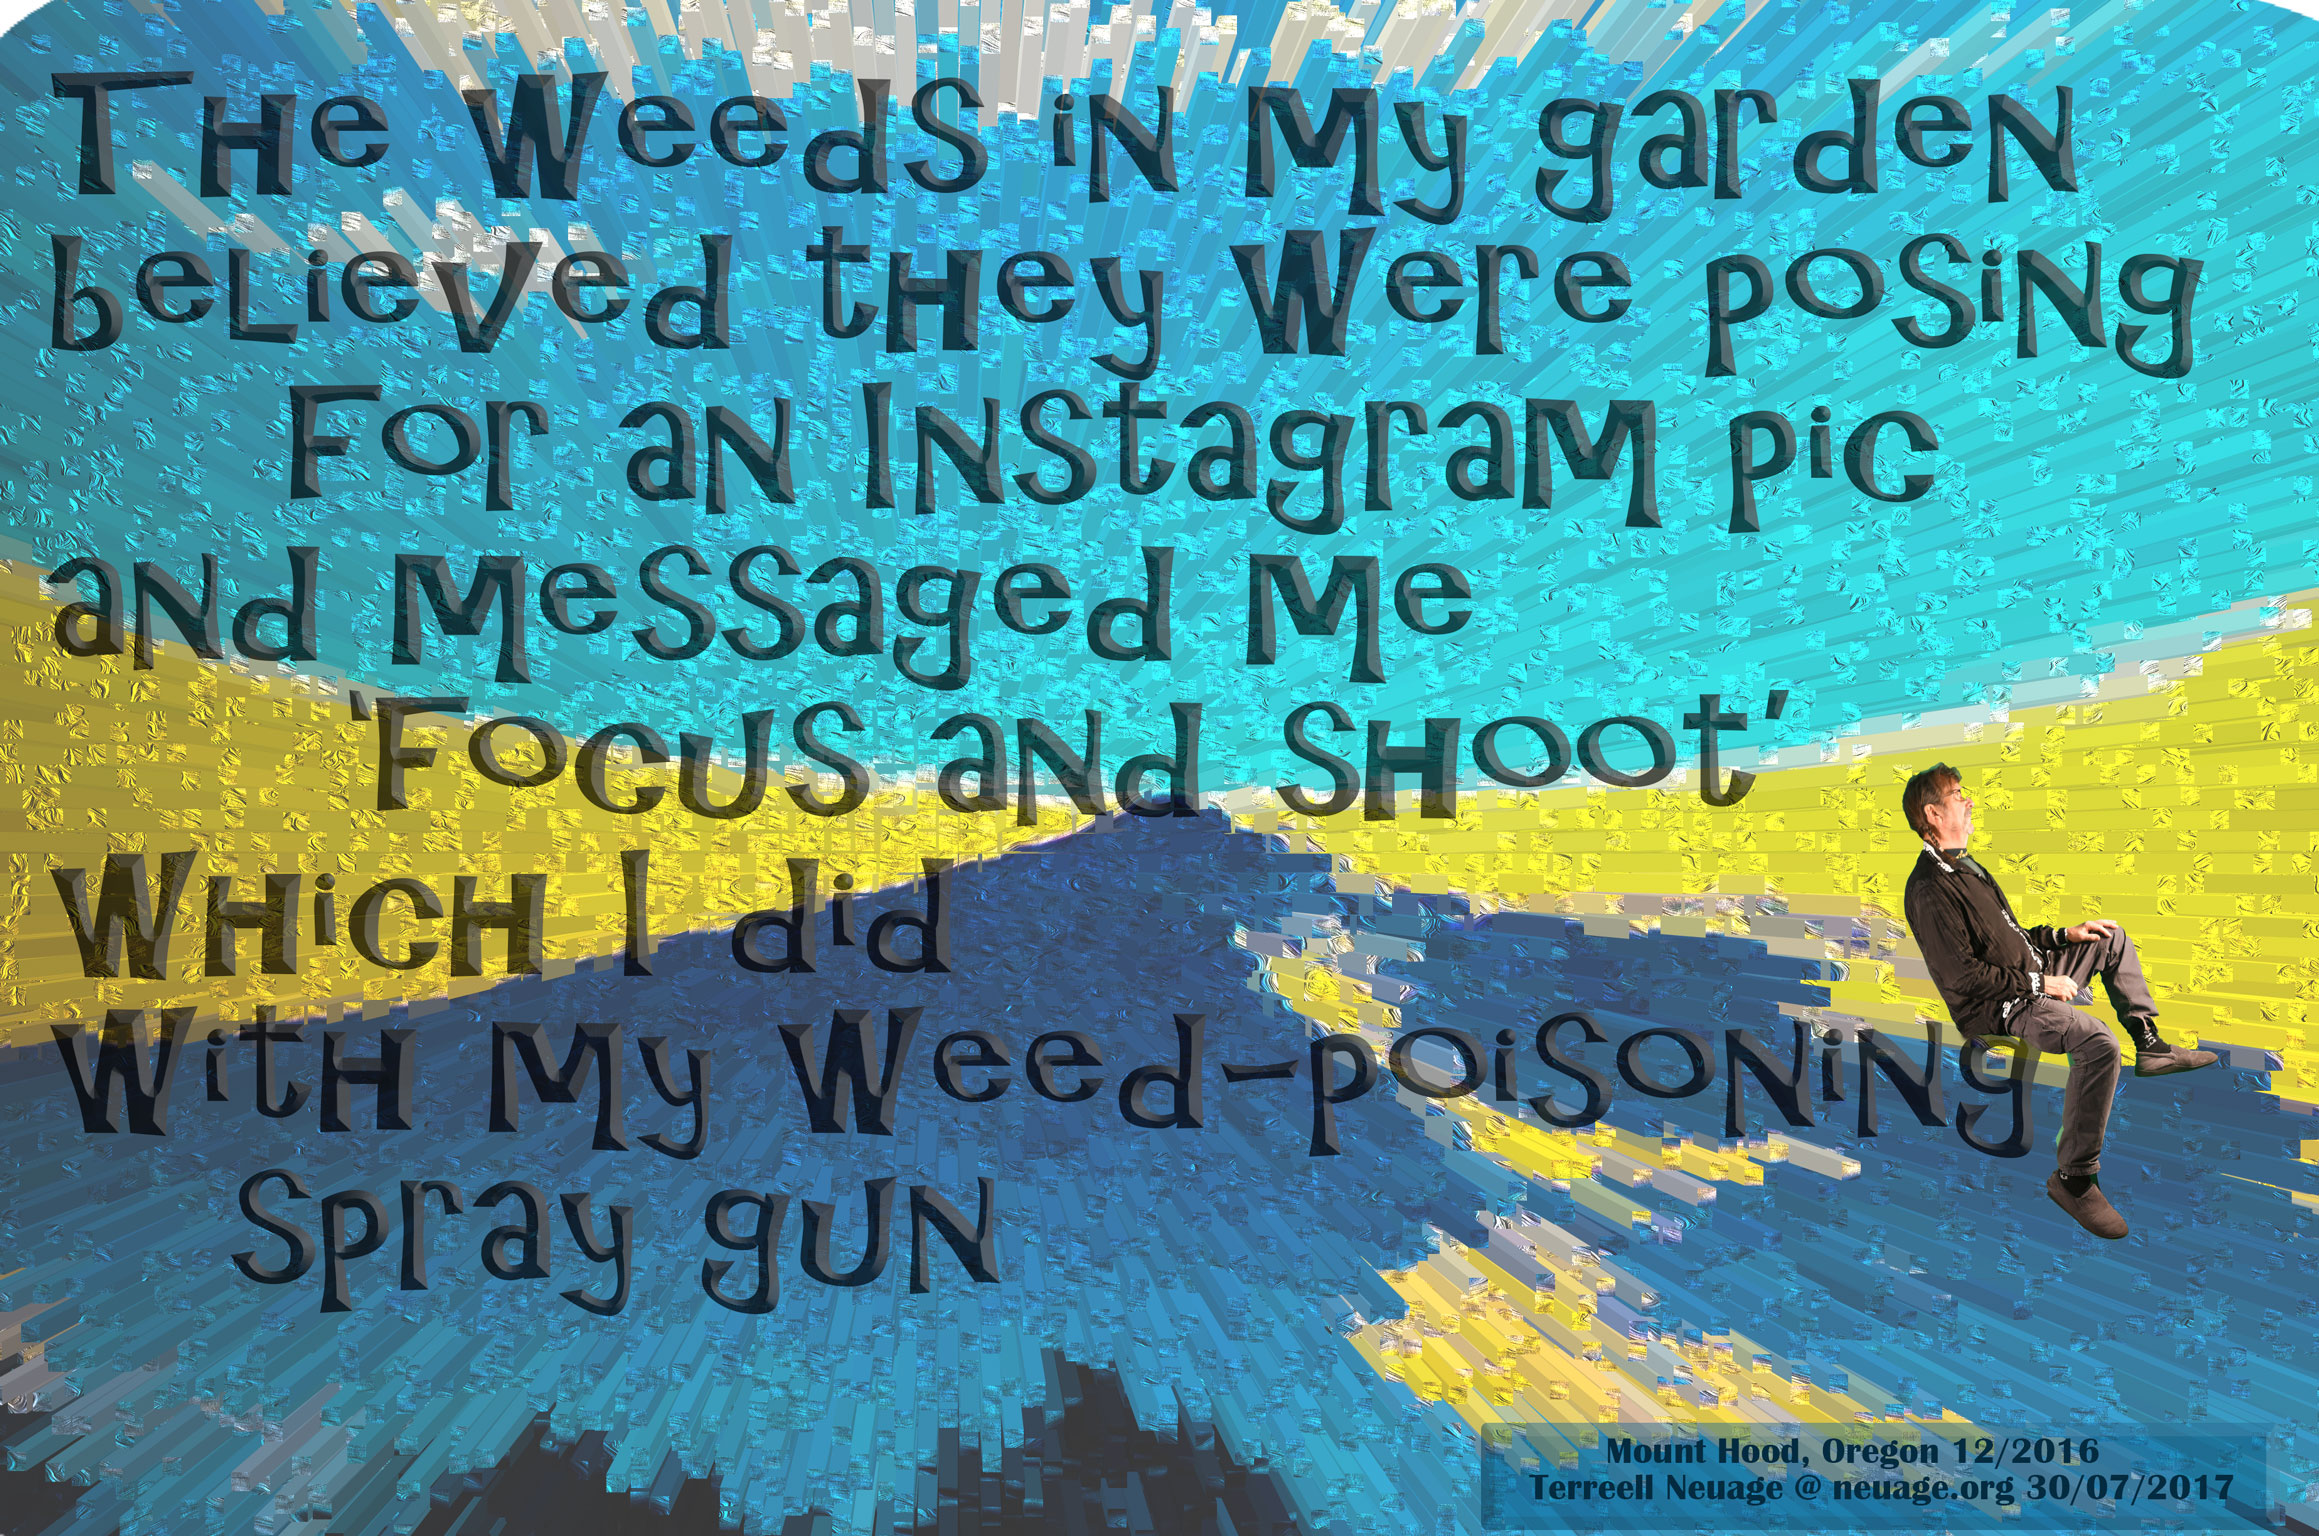 The weeds in my garden believed they were posing for an Instagram pic
and messaged me
‘focus and shoot’
which I did with my weed-poisoning spray gun